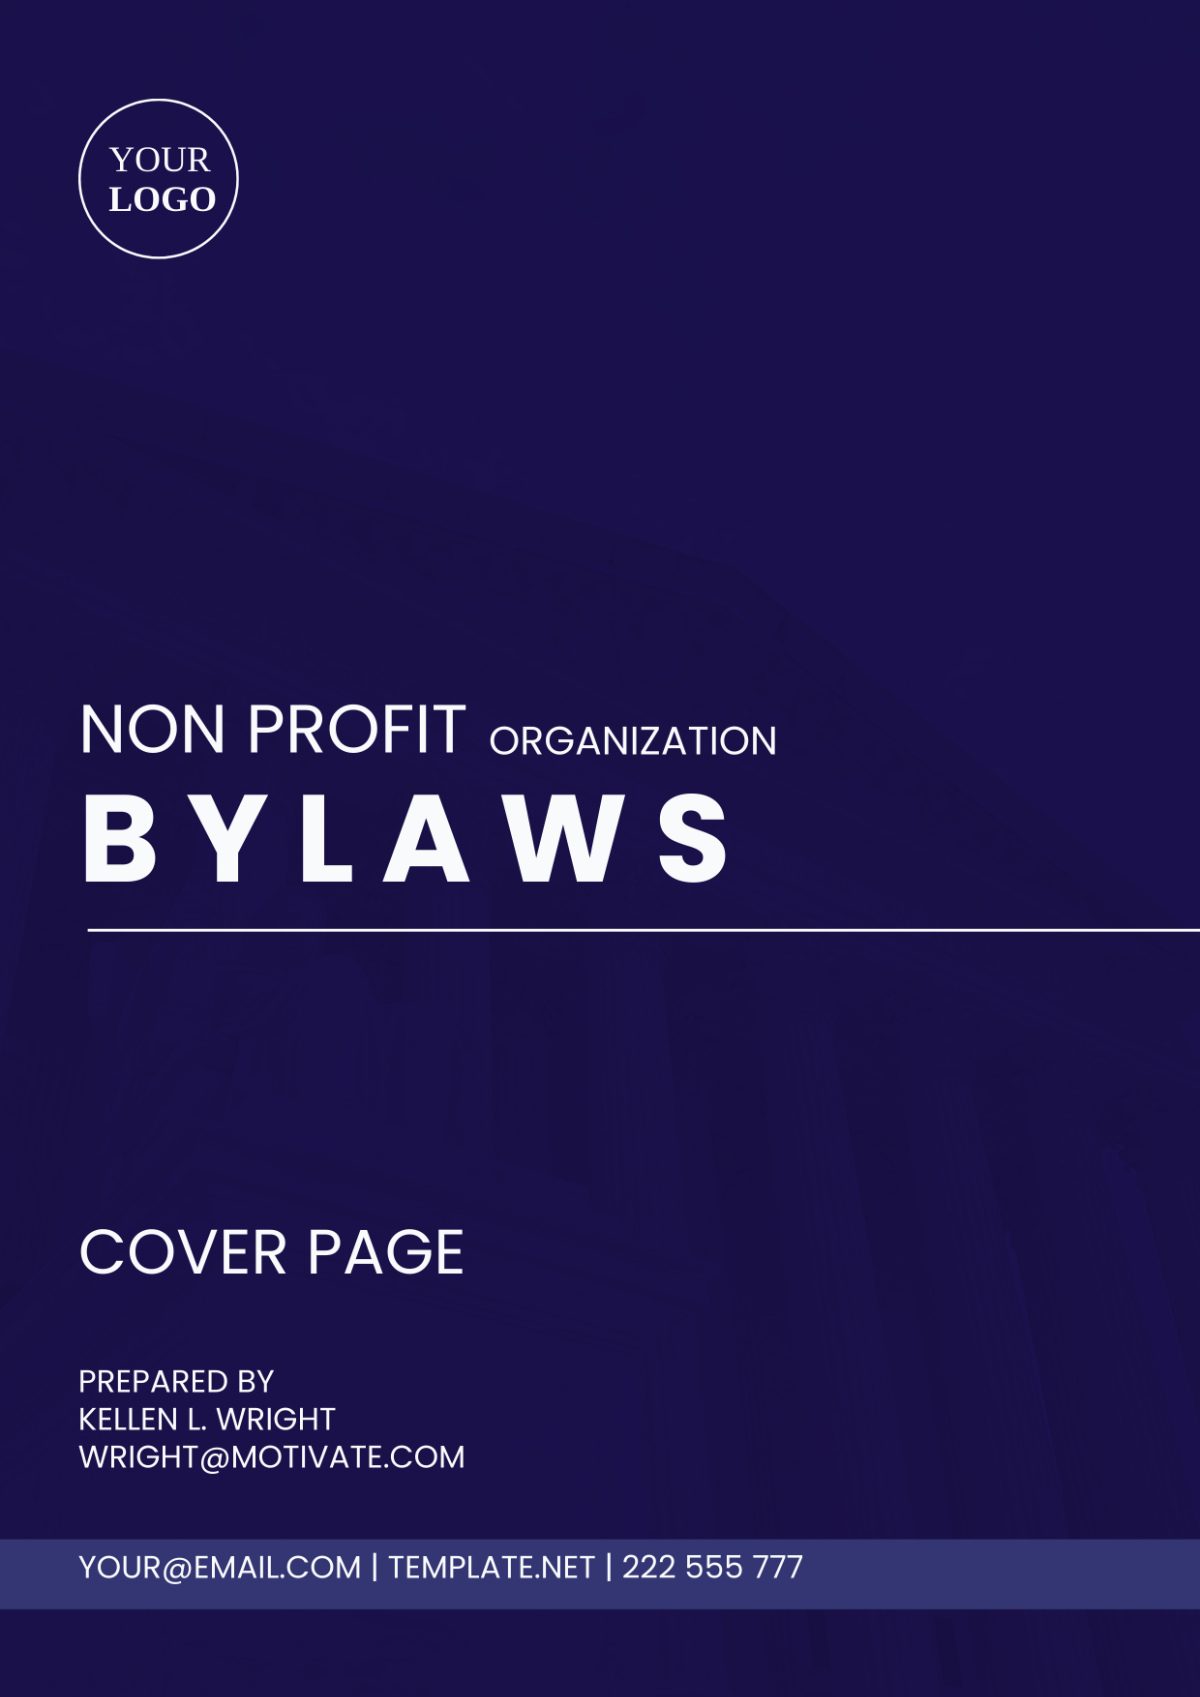 Non Profit Organization Bylaws Cover Page Template